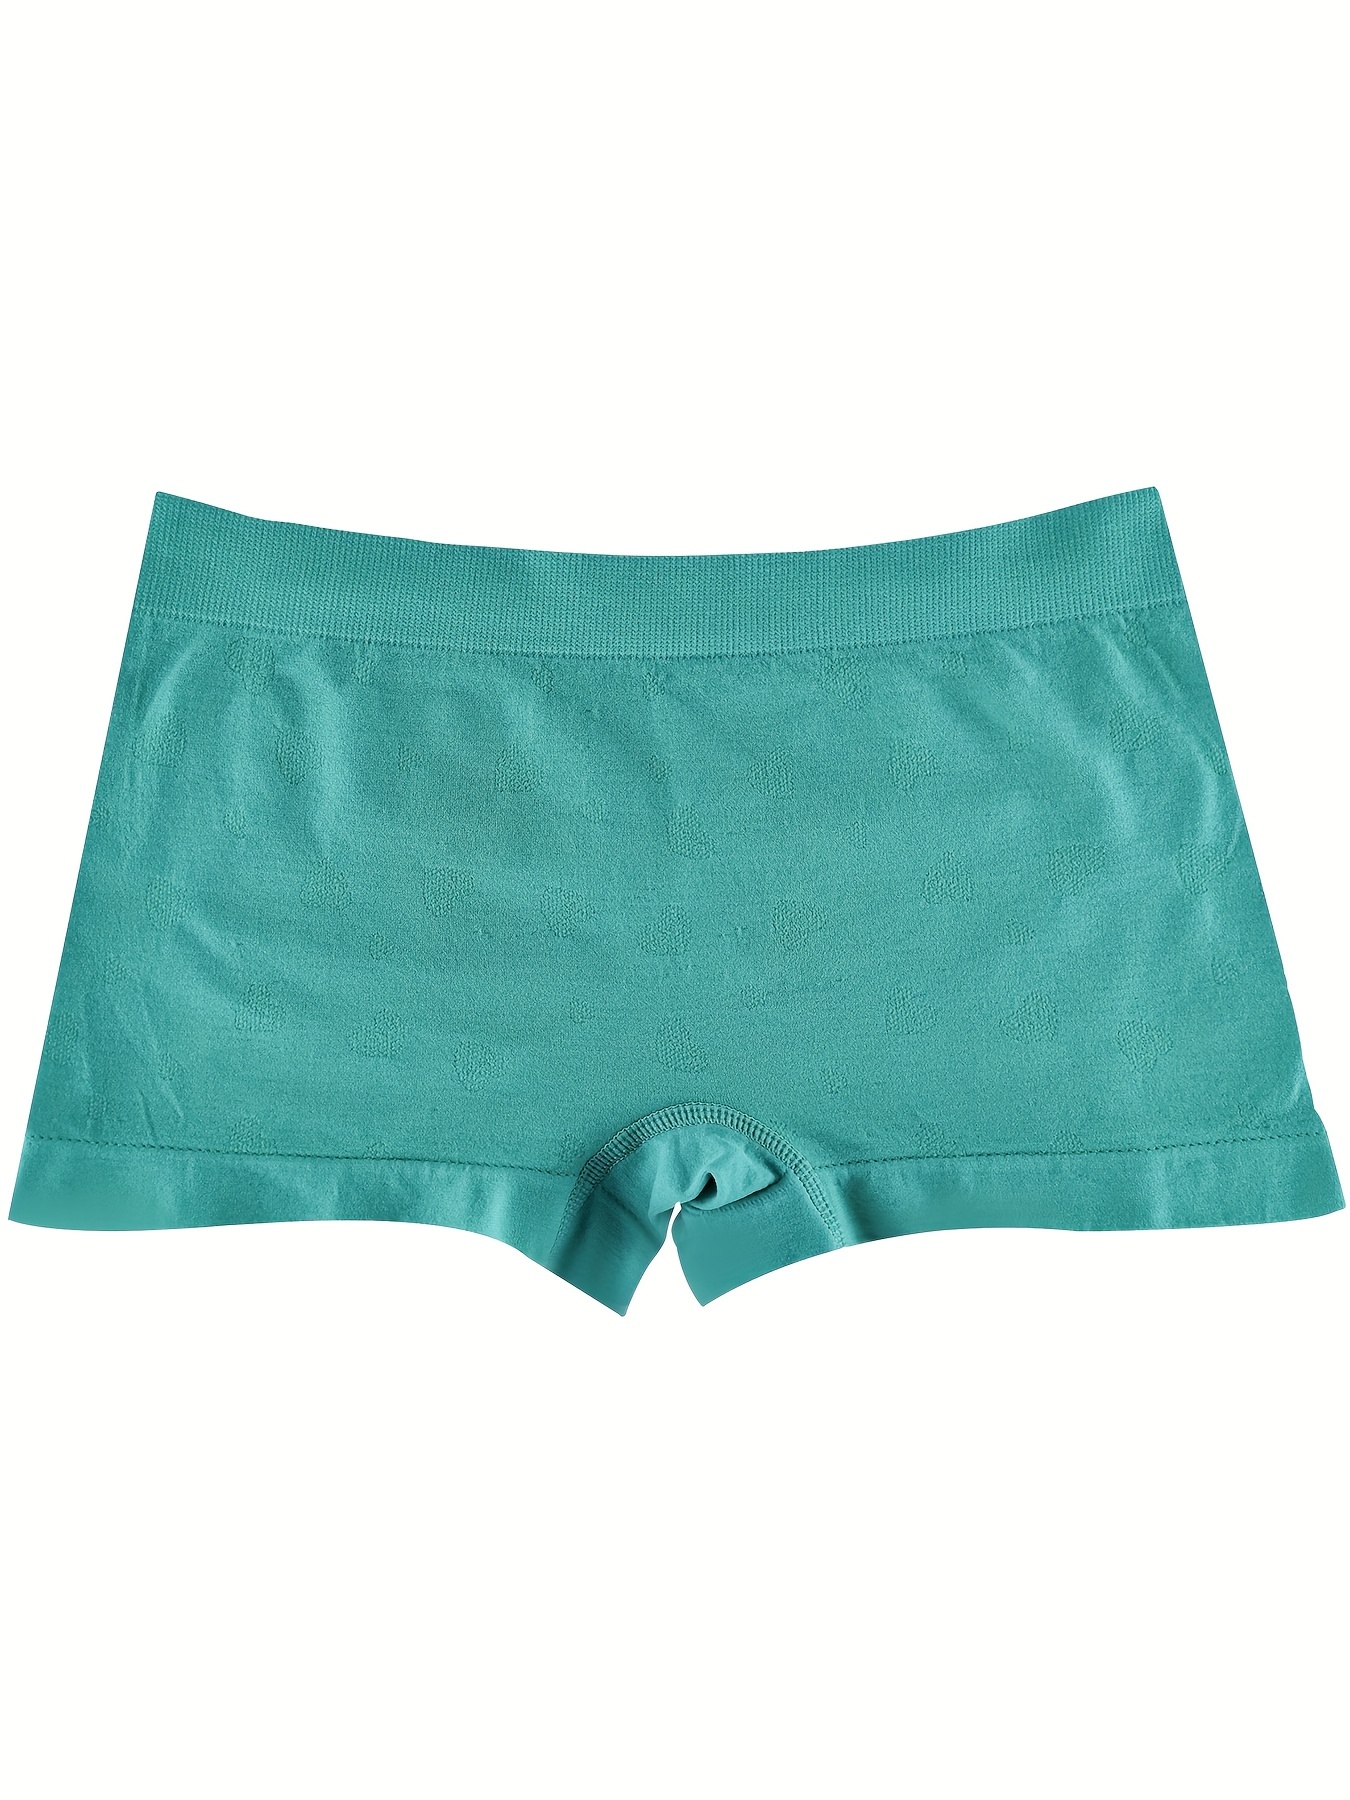 types of knickers for ladies,turquoise knickers,high leg full brief,black  high leg knickers,beautiful women panties,womens cotton shorts